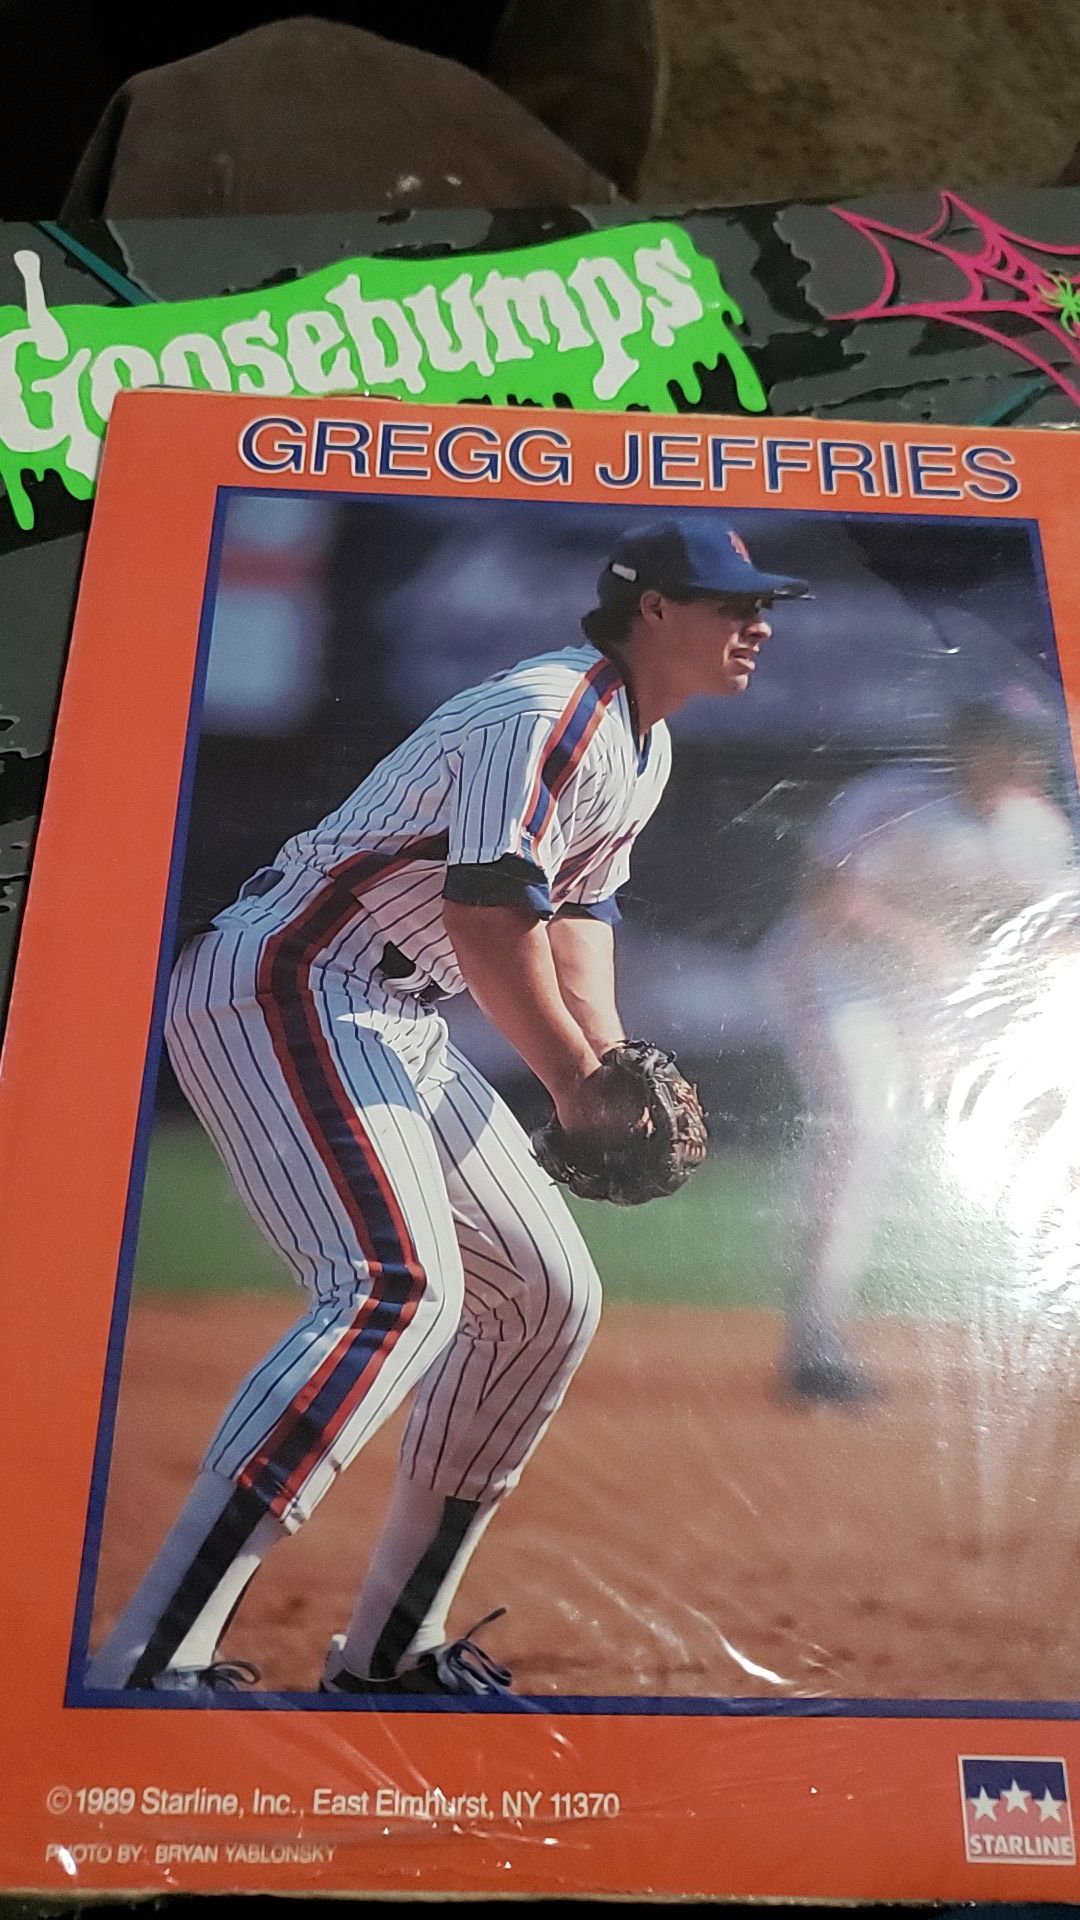 Baseball Posters for Sale